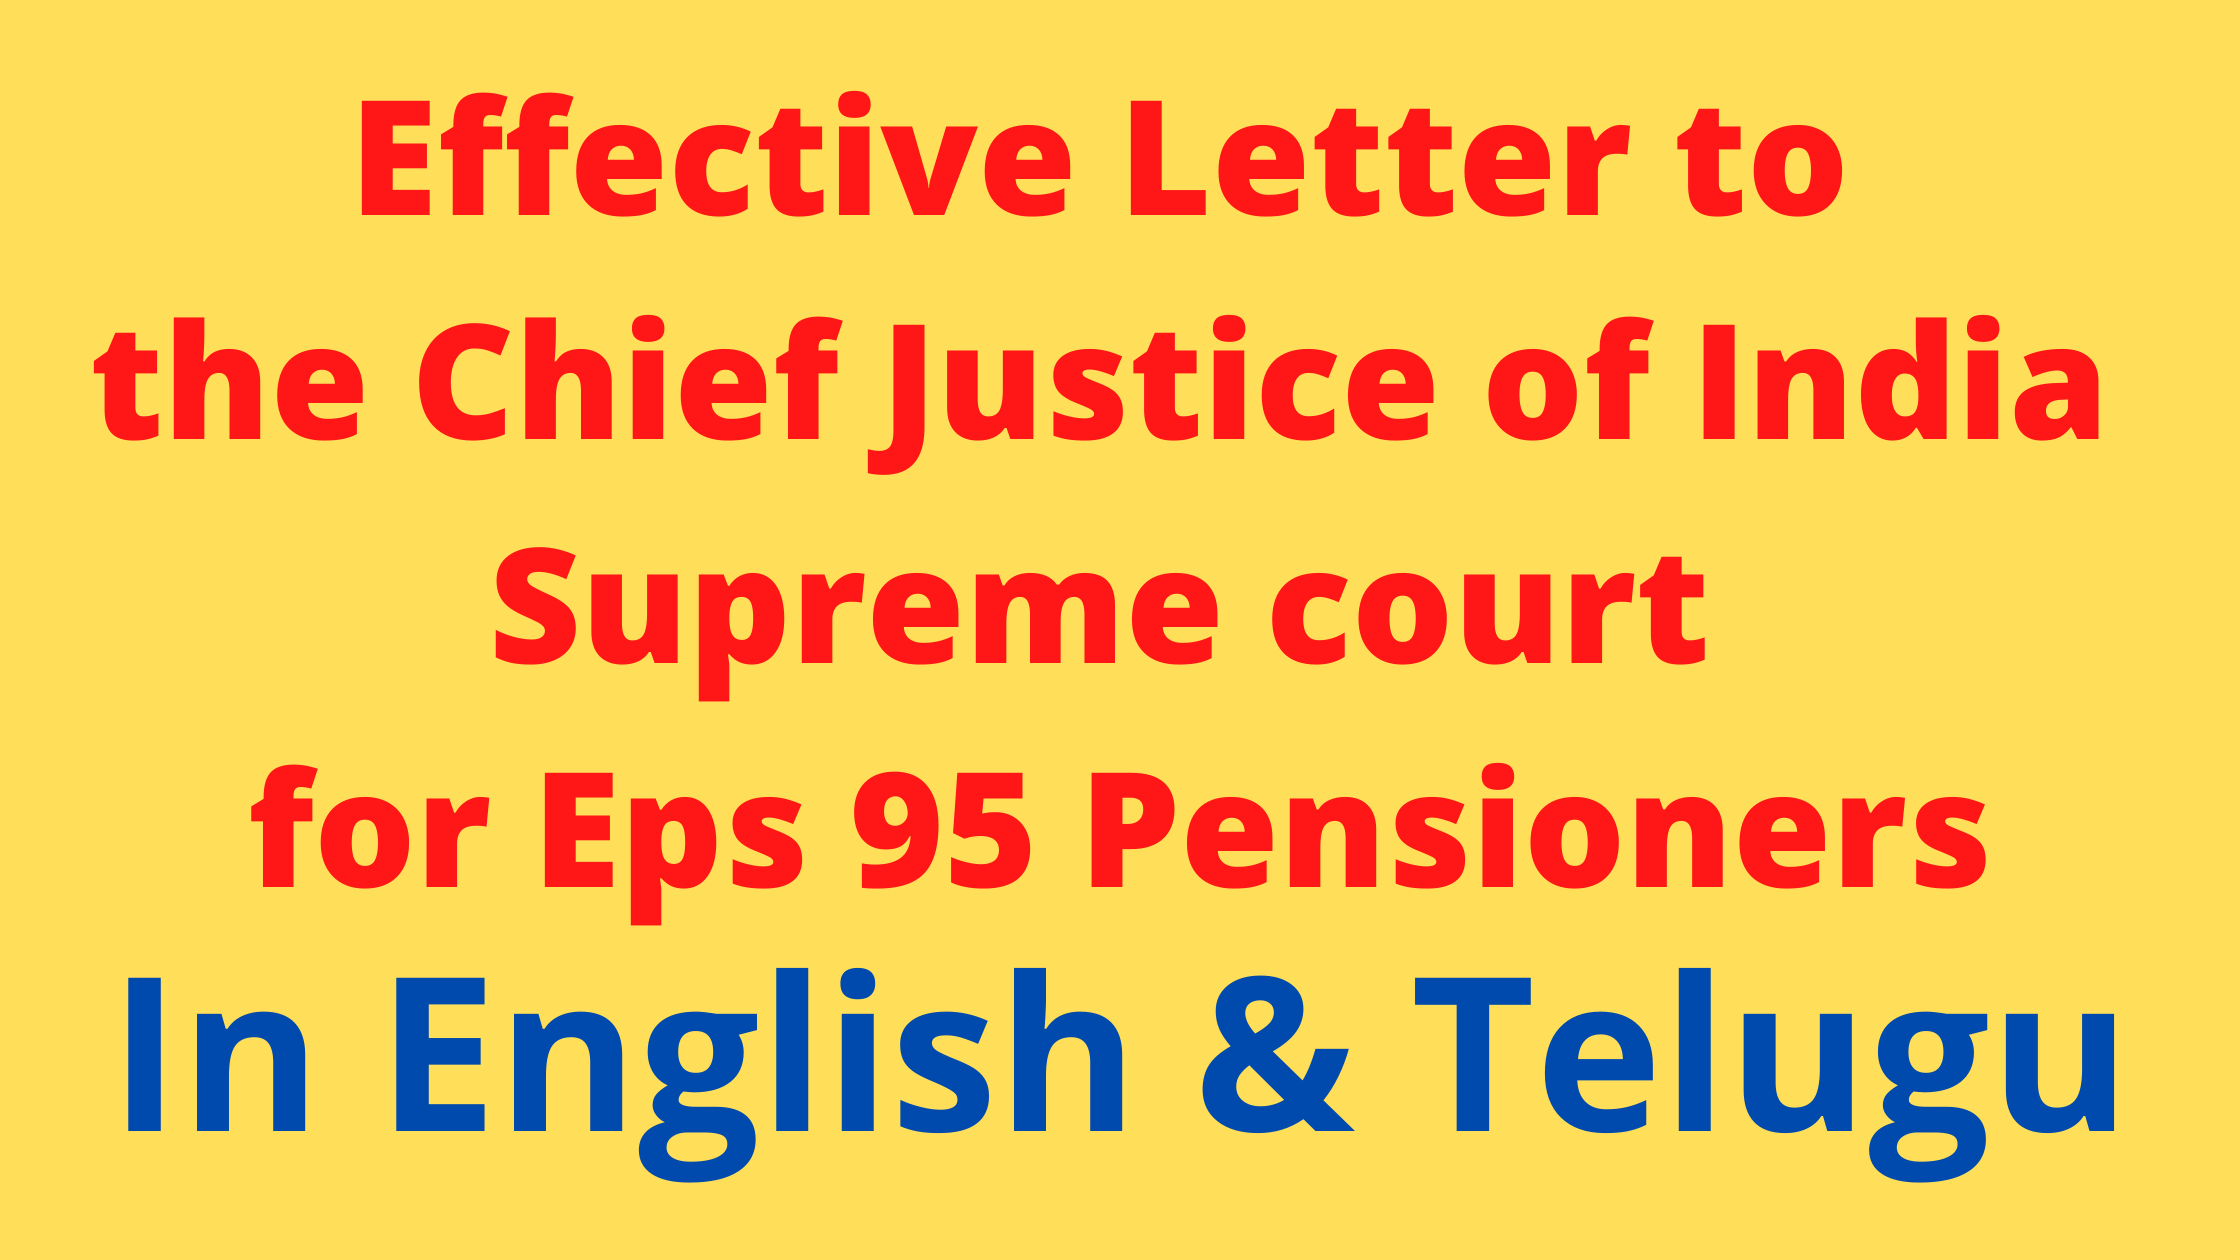 Effective Letter to the CJI Supreme court by TPRPA for Eps 95 Pensioners